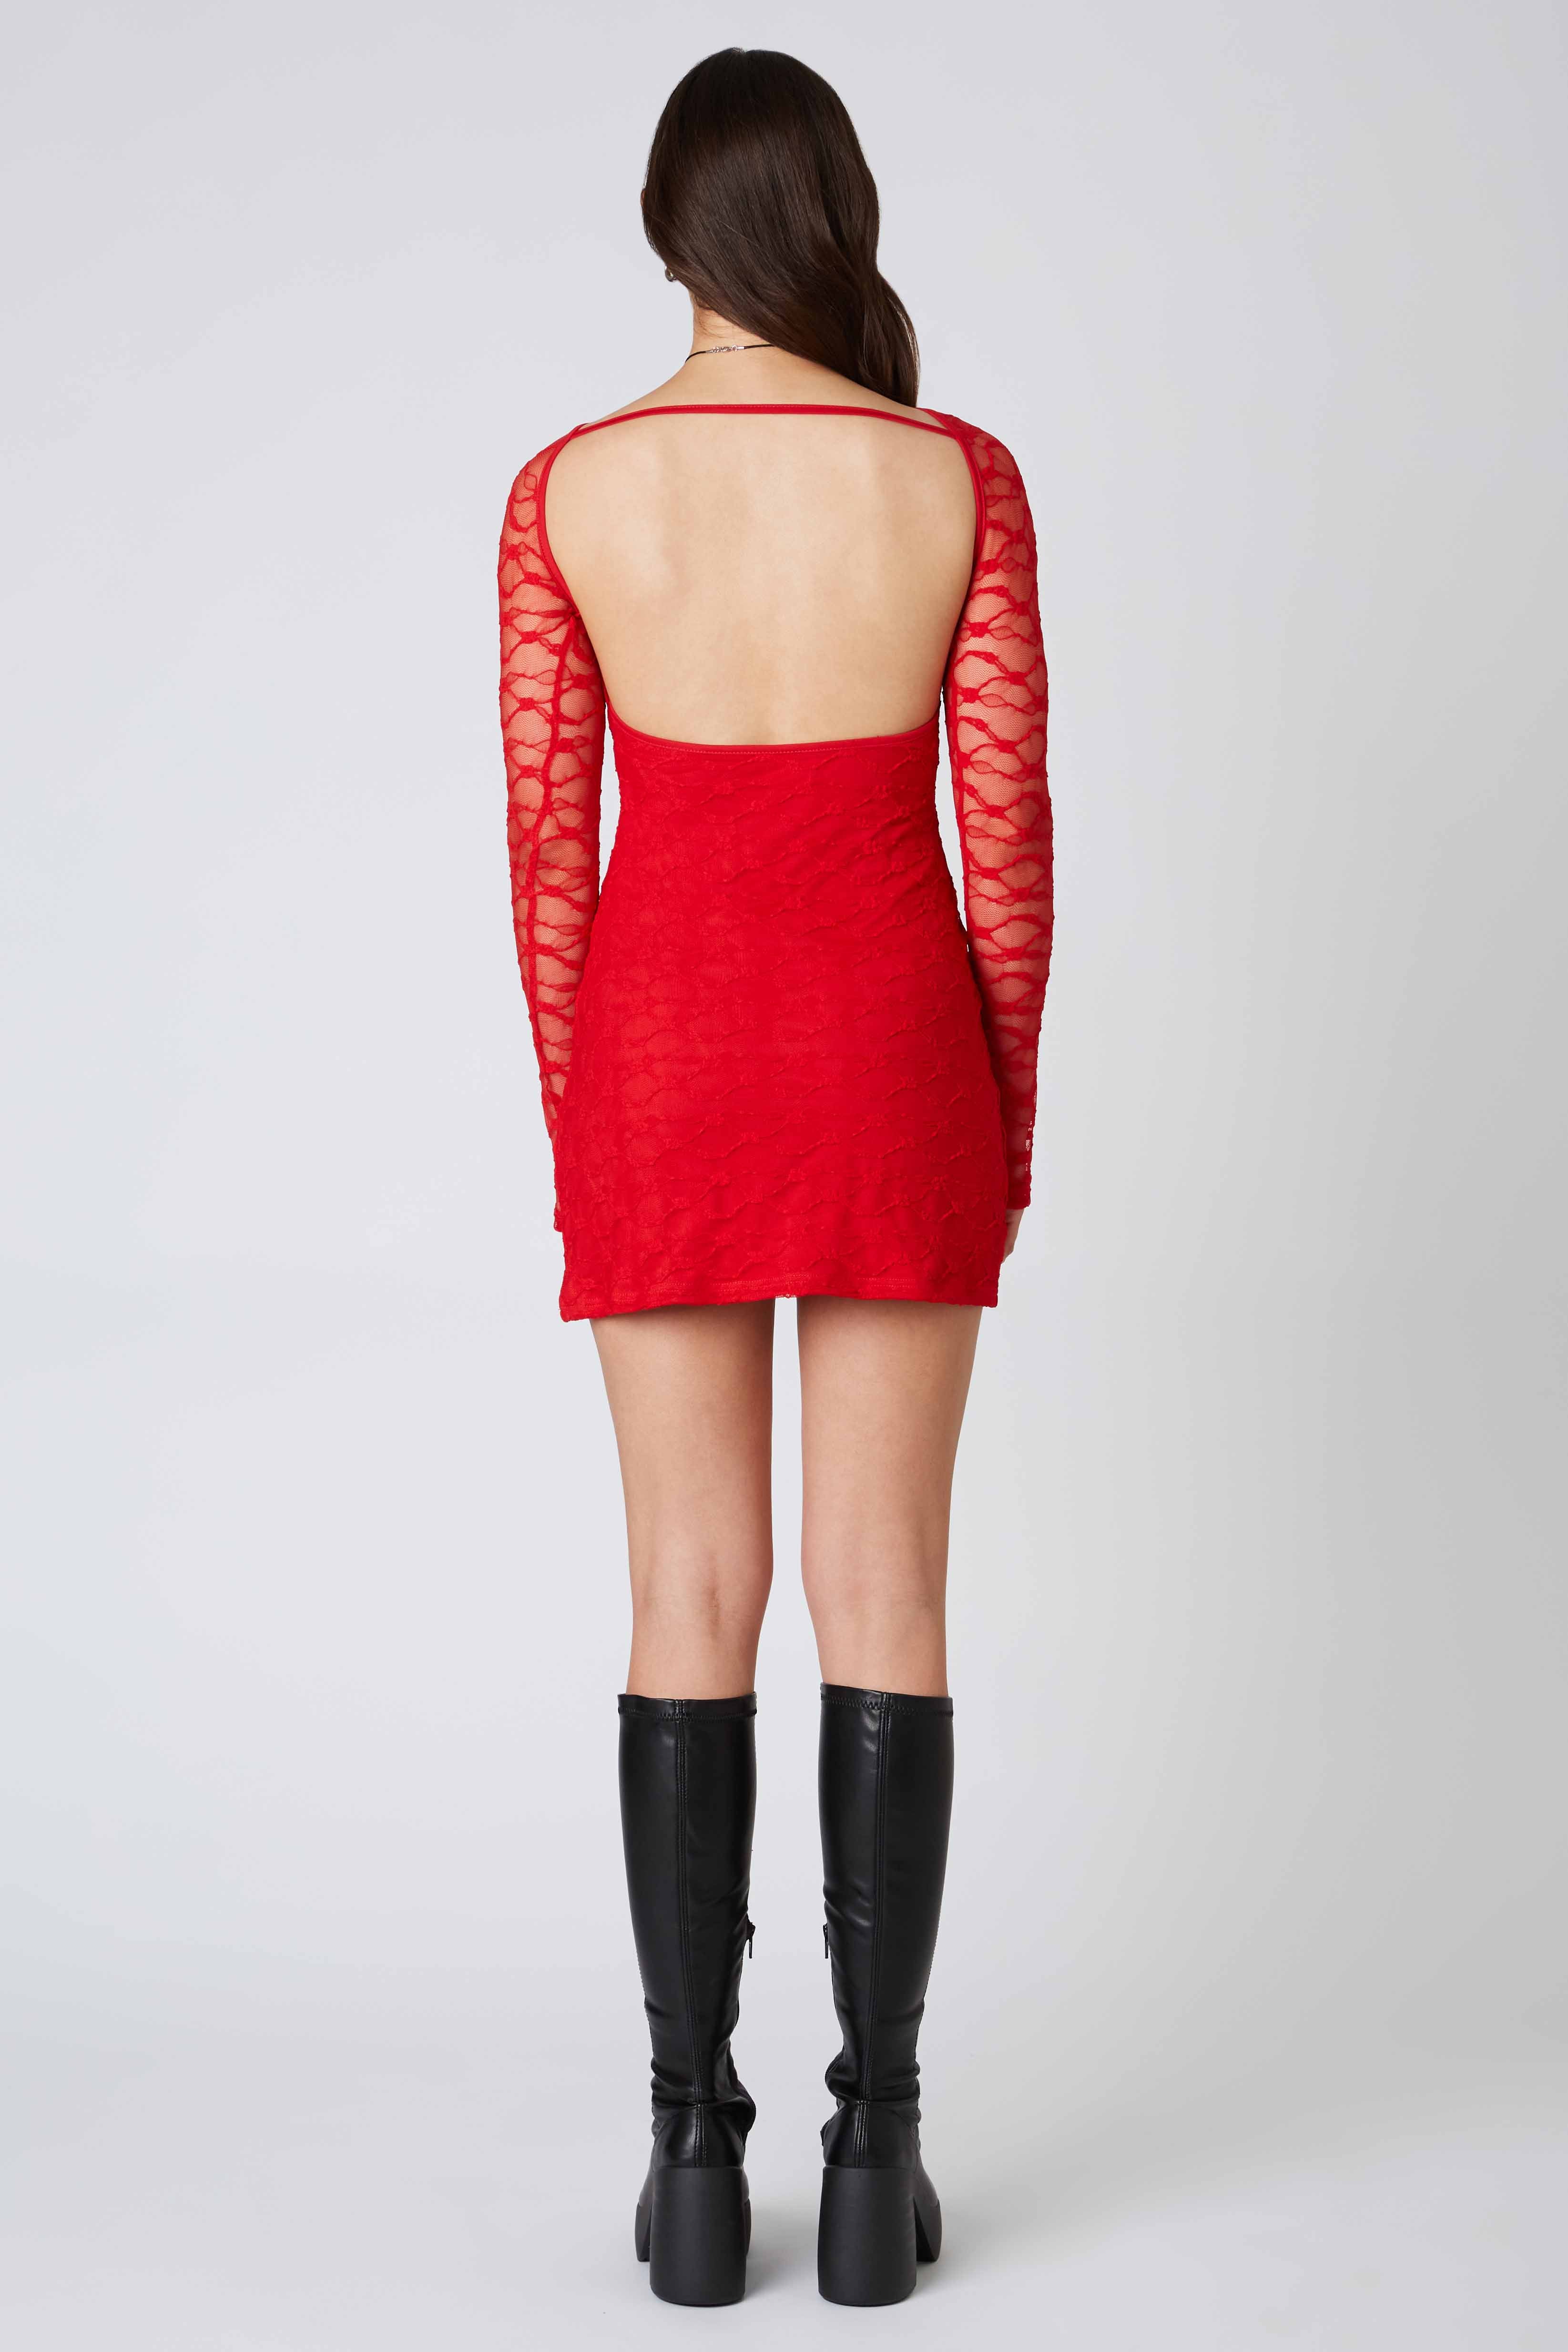 Lace Long Sleeve Mini Dress in Red Back View